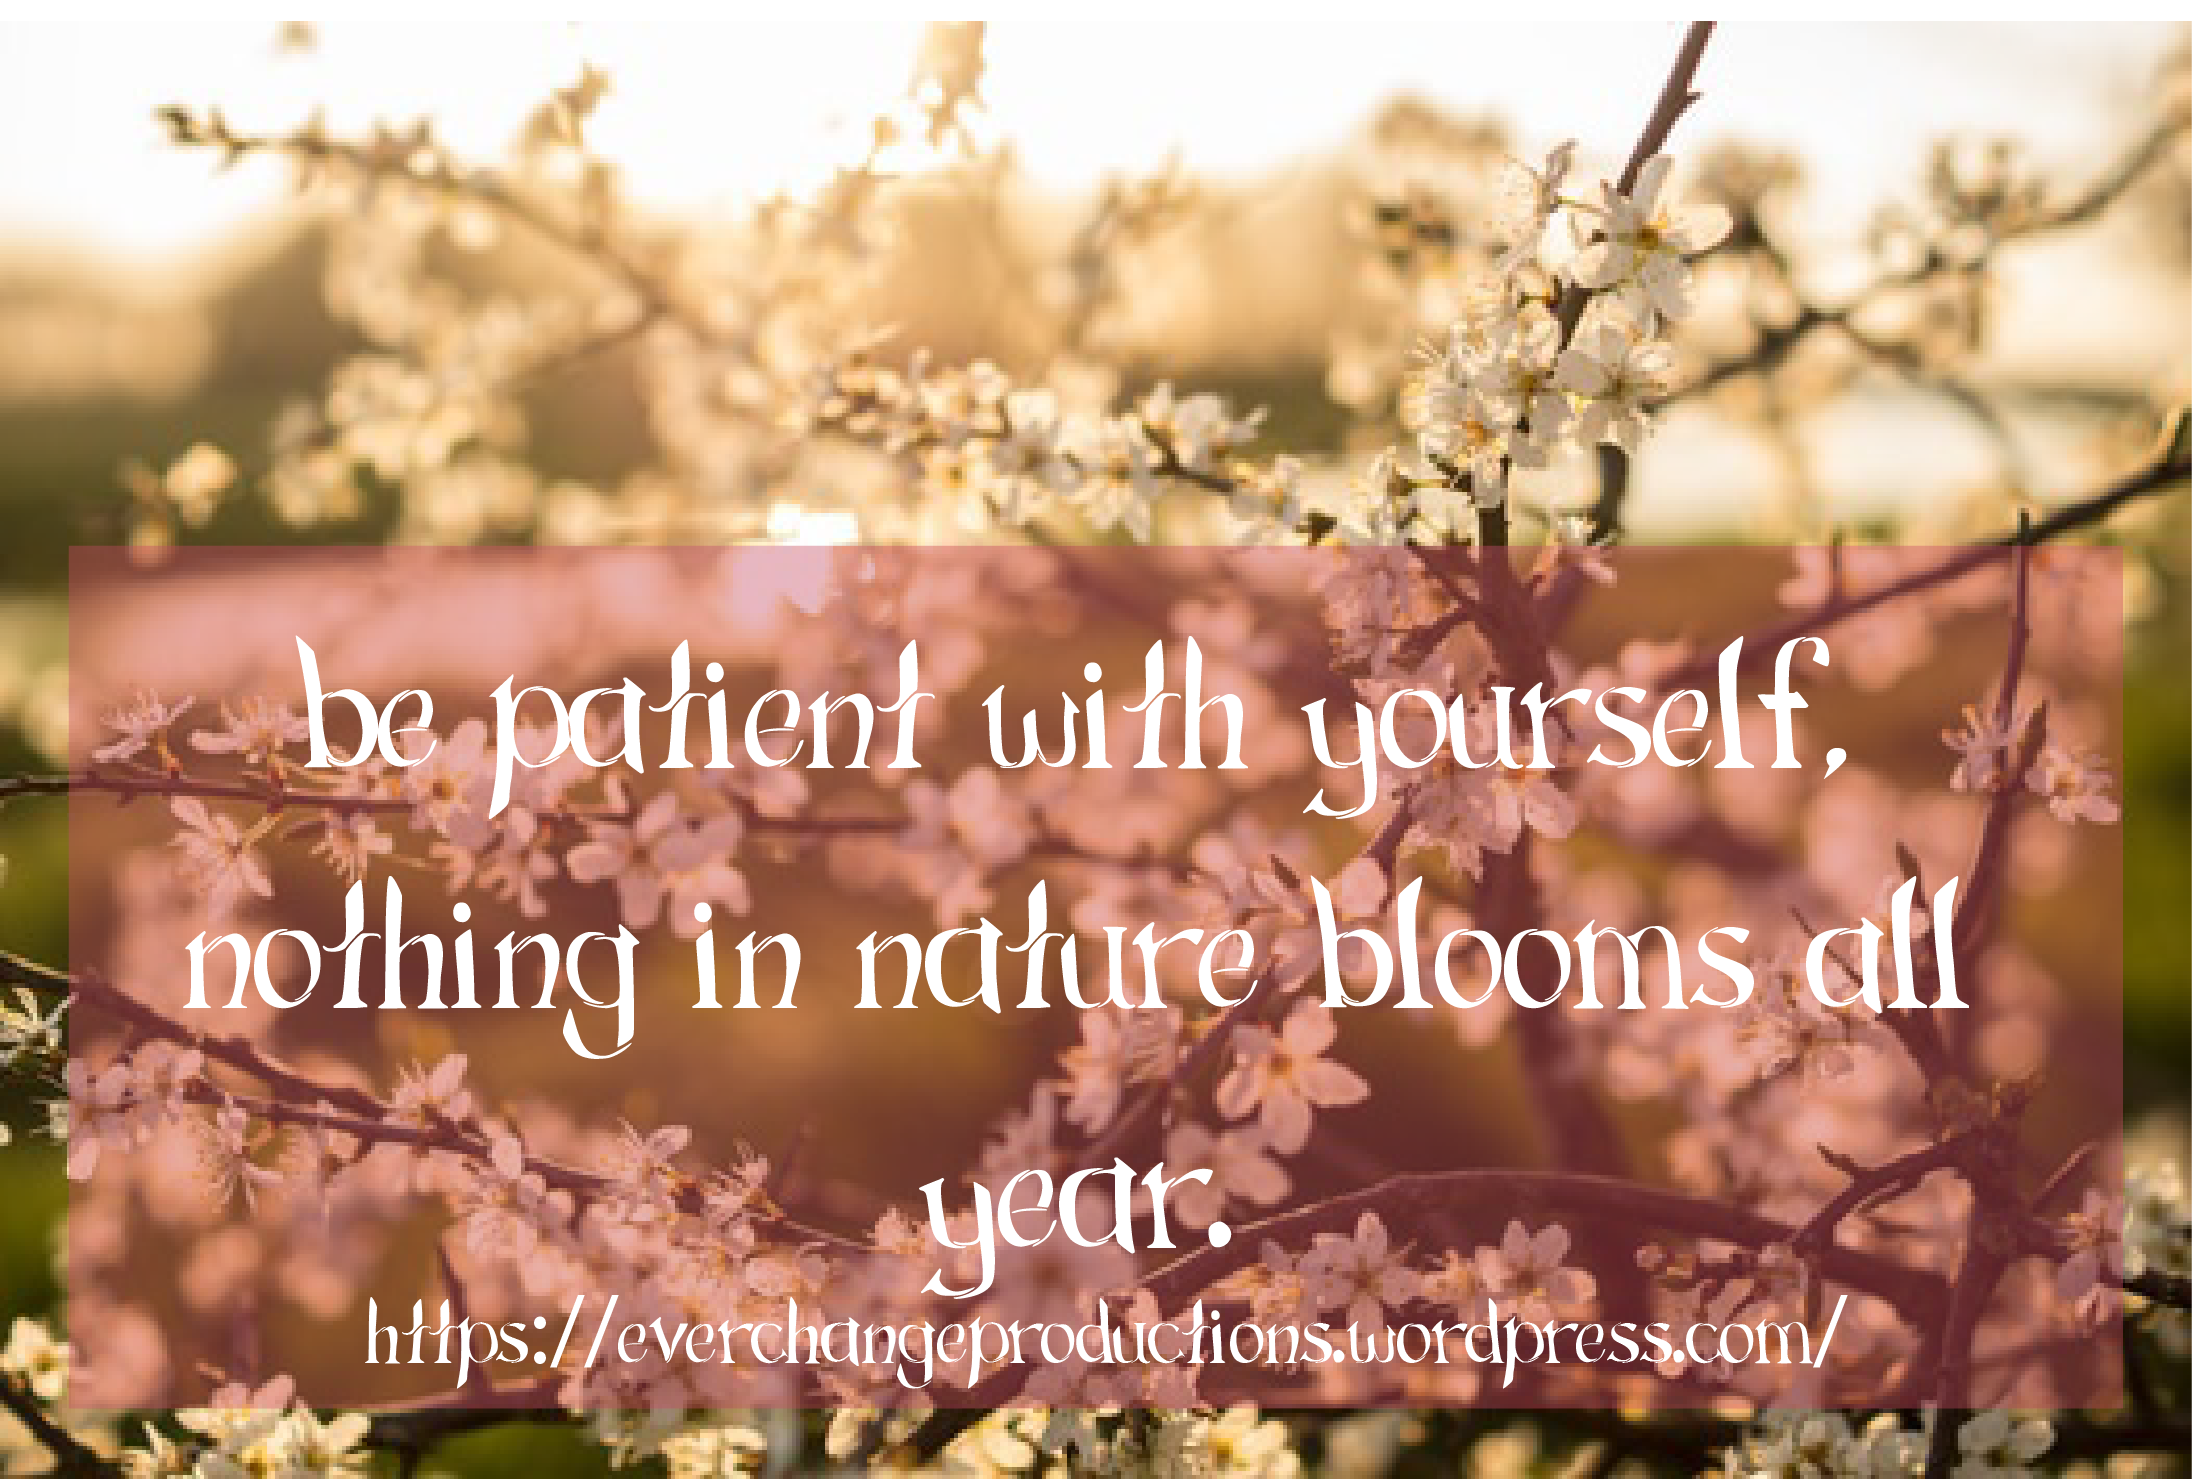 Do you need some encouragement to get you started this week? Just remember: Be patient with yourself, nothing in nature blooms all year.